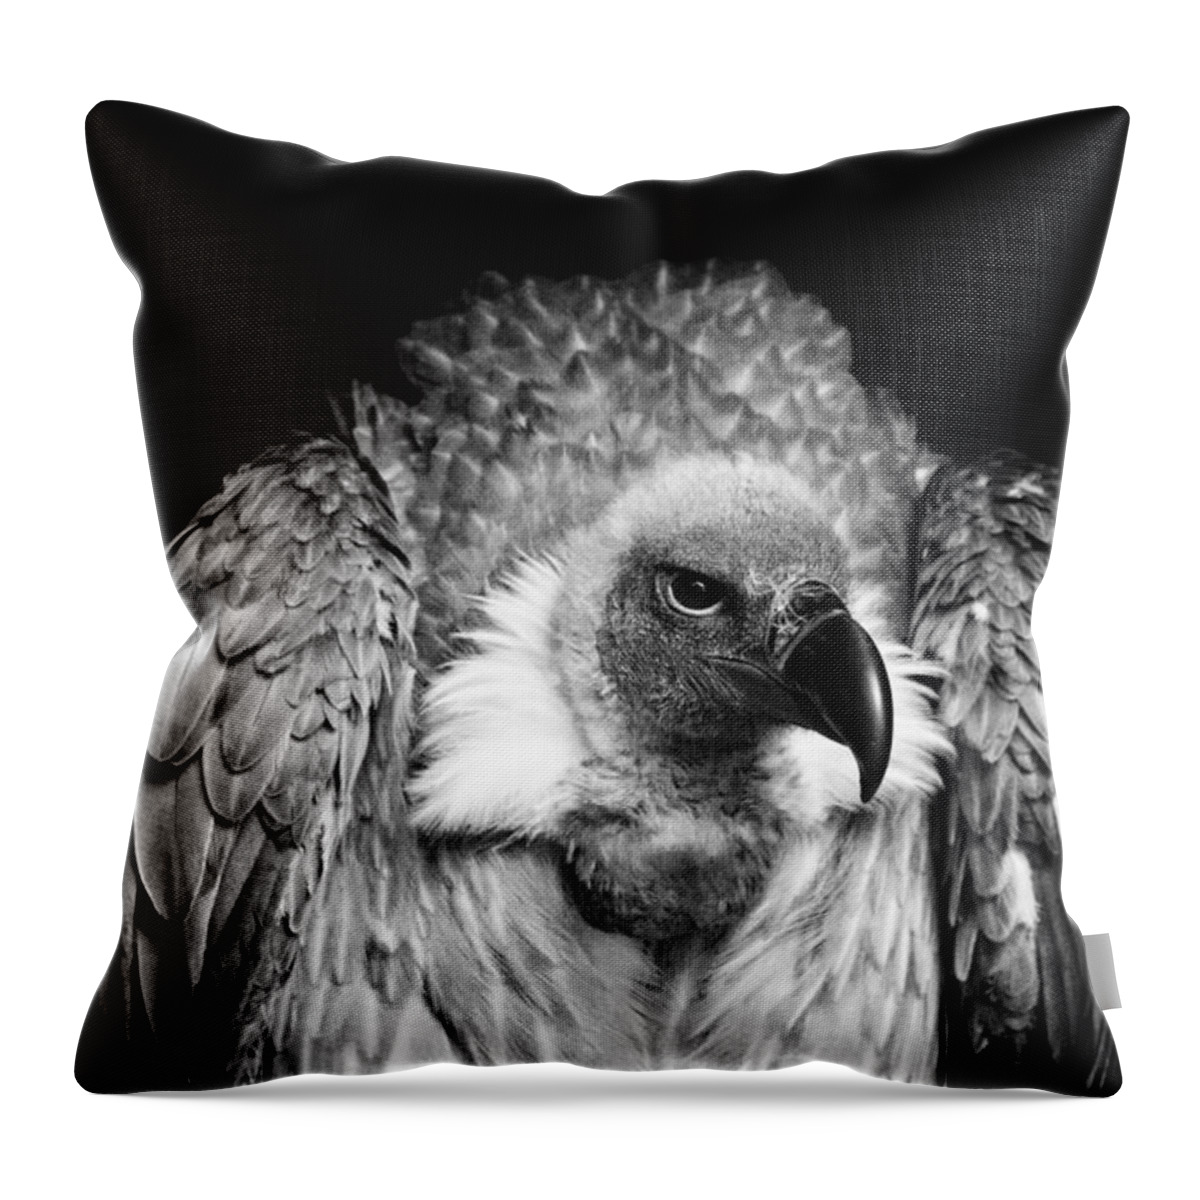 Vulture Throw Pillow featuring the photograph The Scavenger by Chris Whittle